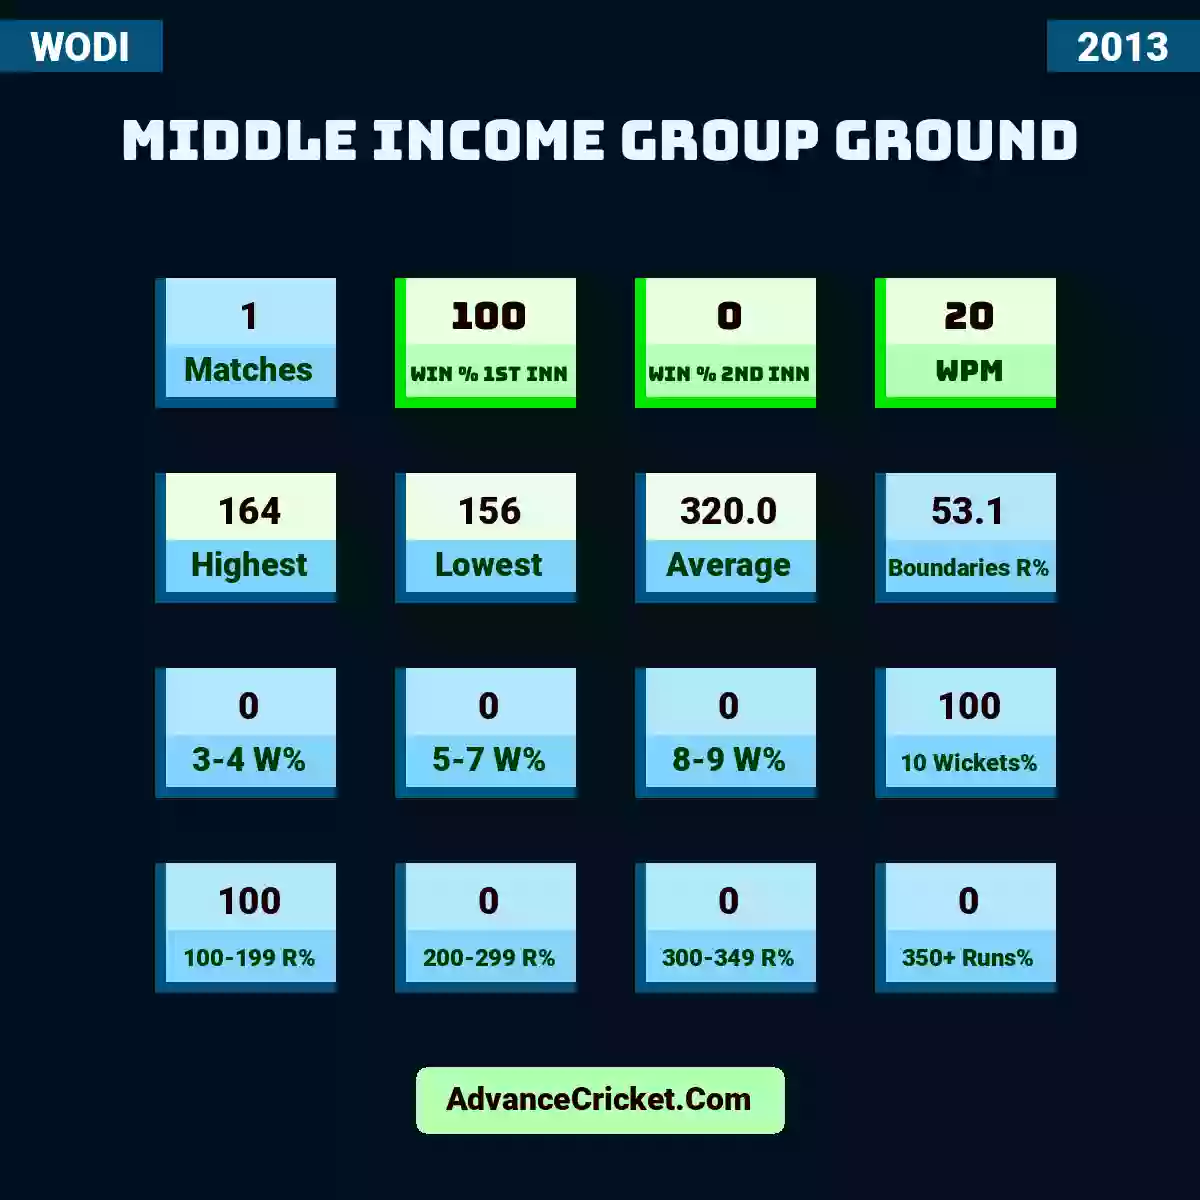 Image showing Middle Income Group Ground with Matches: 1, Win % 1st Inn: 100, Win % 2nd Inn: 0, WPM: 20, Highest: 164, Lowest: 156, Average: 320.0, Boundaries R%: 53.1, 3-4 W%: 0, 5-7 W%: 0, 8-9 W%: 0, 10 Wickets%: 100, 100-199 R%: 100, 200-299 R%: 0, 300-349 R%: 0, 350+ Runs%: 0.